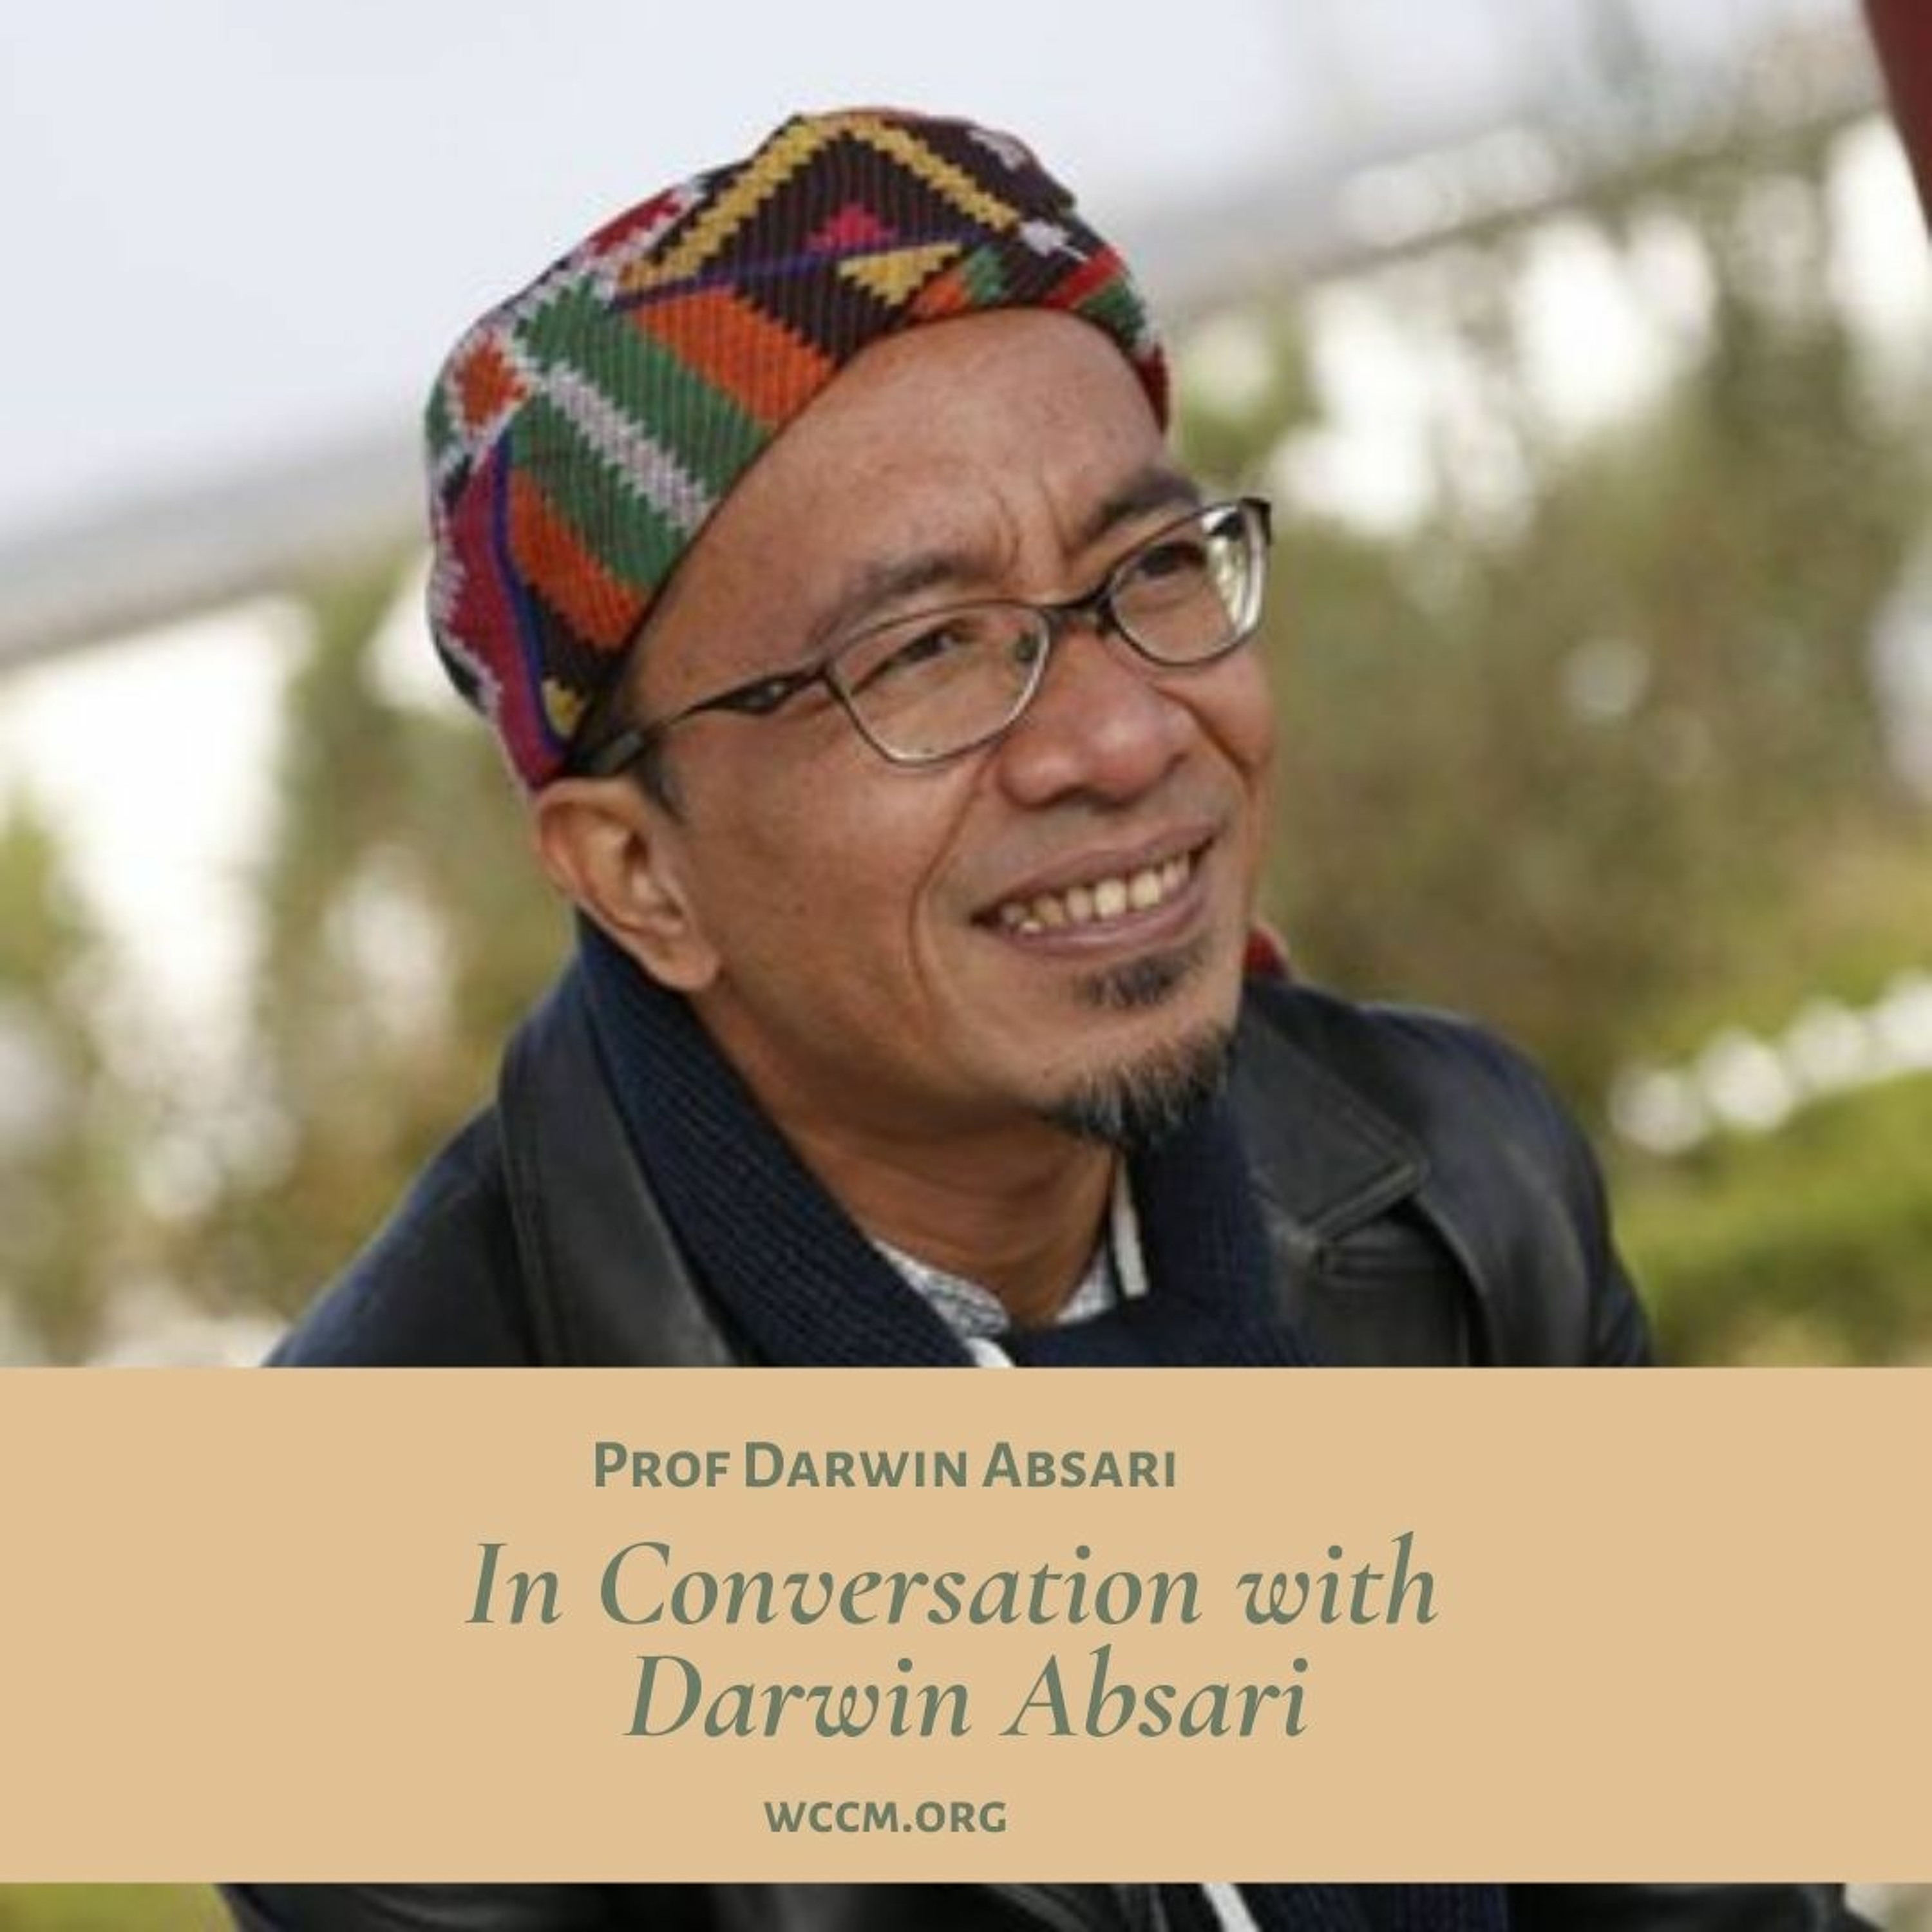 In Conversation with Prof Darwin Absari